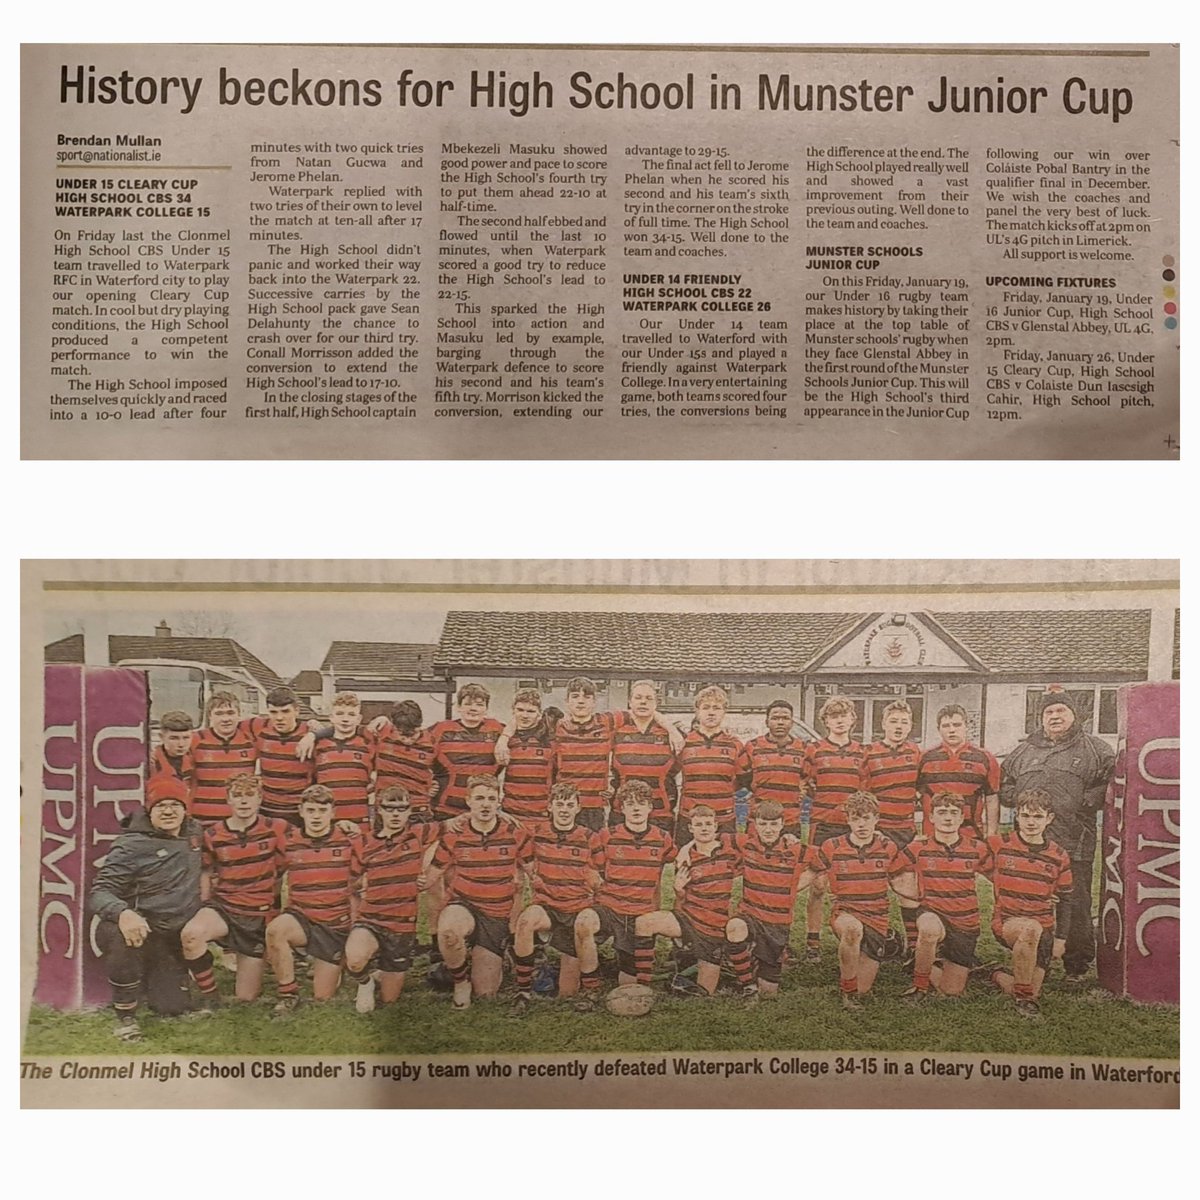 Fantastic coverage of our Rugby News in this week's @TheNationalist 🏉🔴⚫️🏉
#rugbynews #schoolrugby 🏉